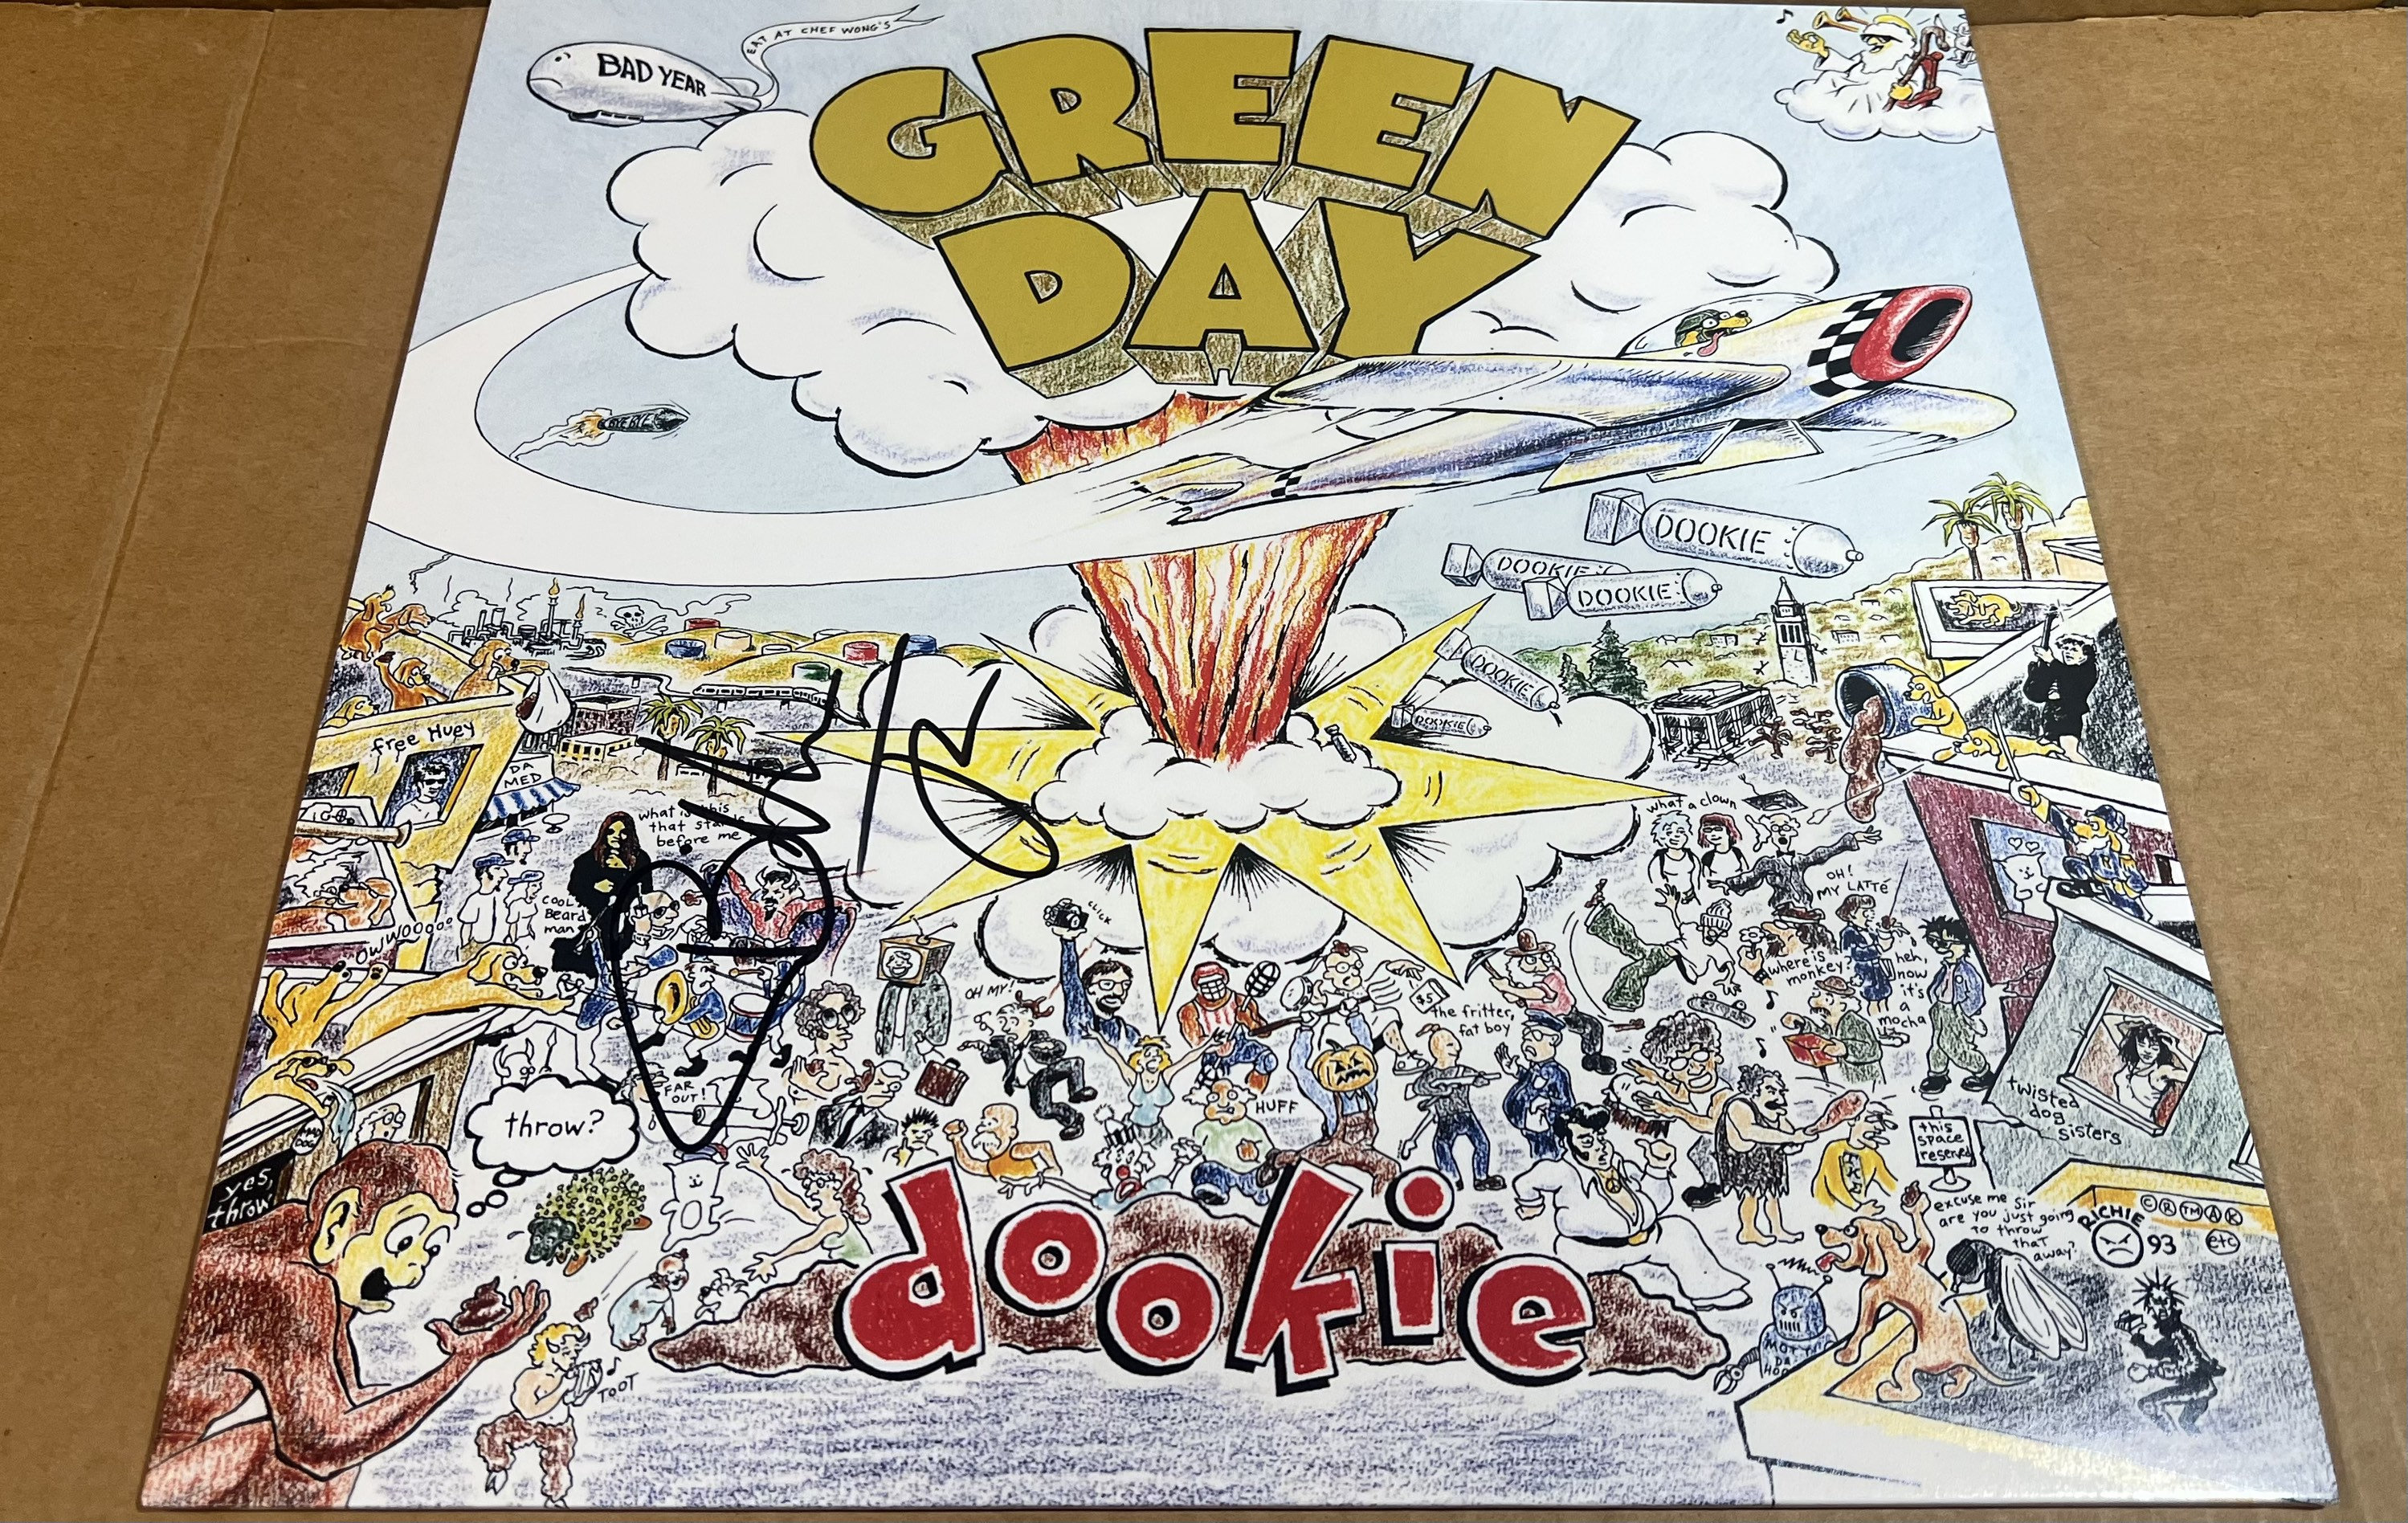 Billie Joe Armstrong Signed Green Day Vinyl Record Album with